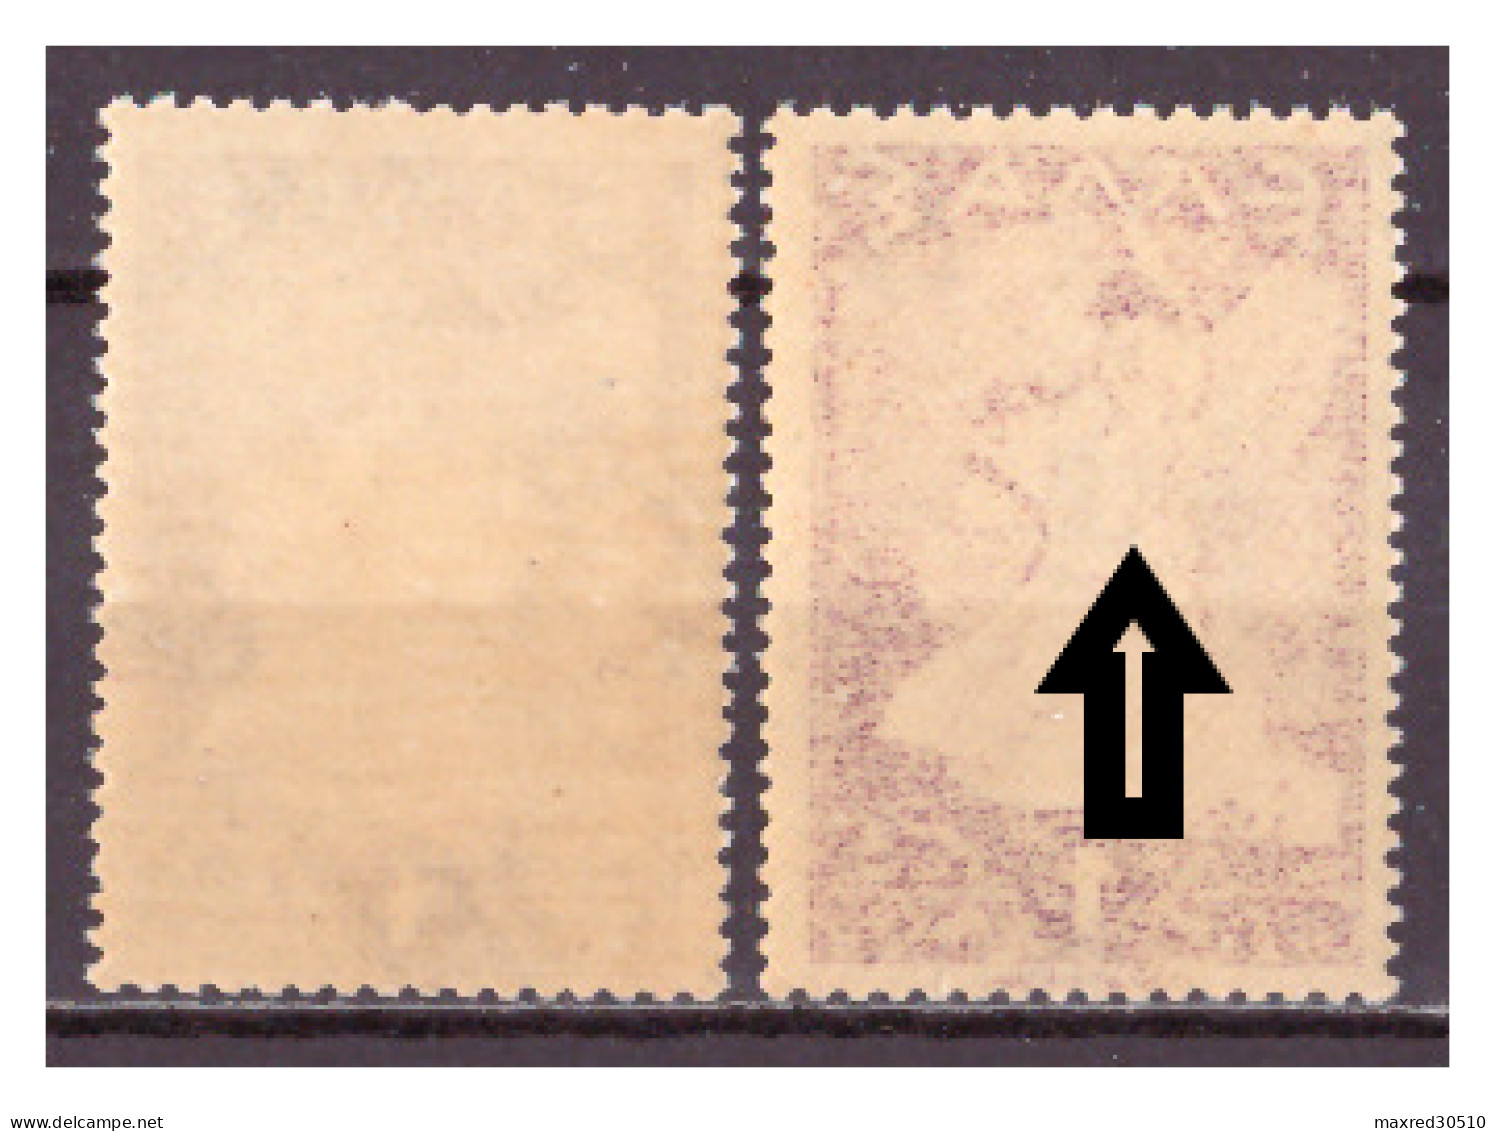 GREECE 1945 2X1L. OF THE "GLORY ISSUE" THE 2ND ONE (SEE ARROWS) WITH MIRROR PRINTING AT THE GUM ERROR MNH - Varietà & Curiosità